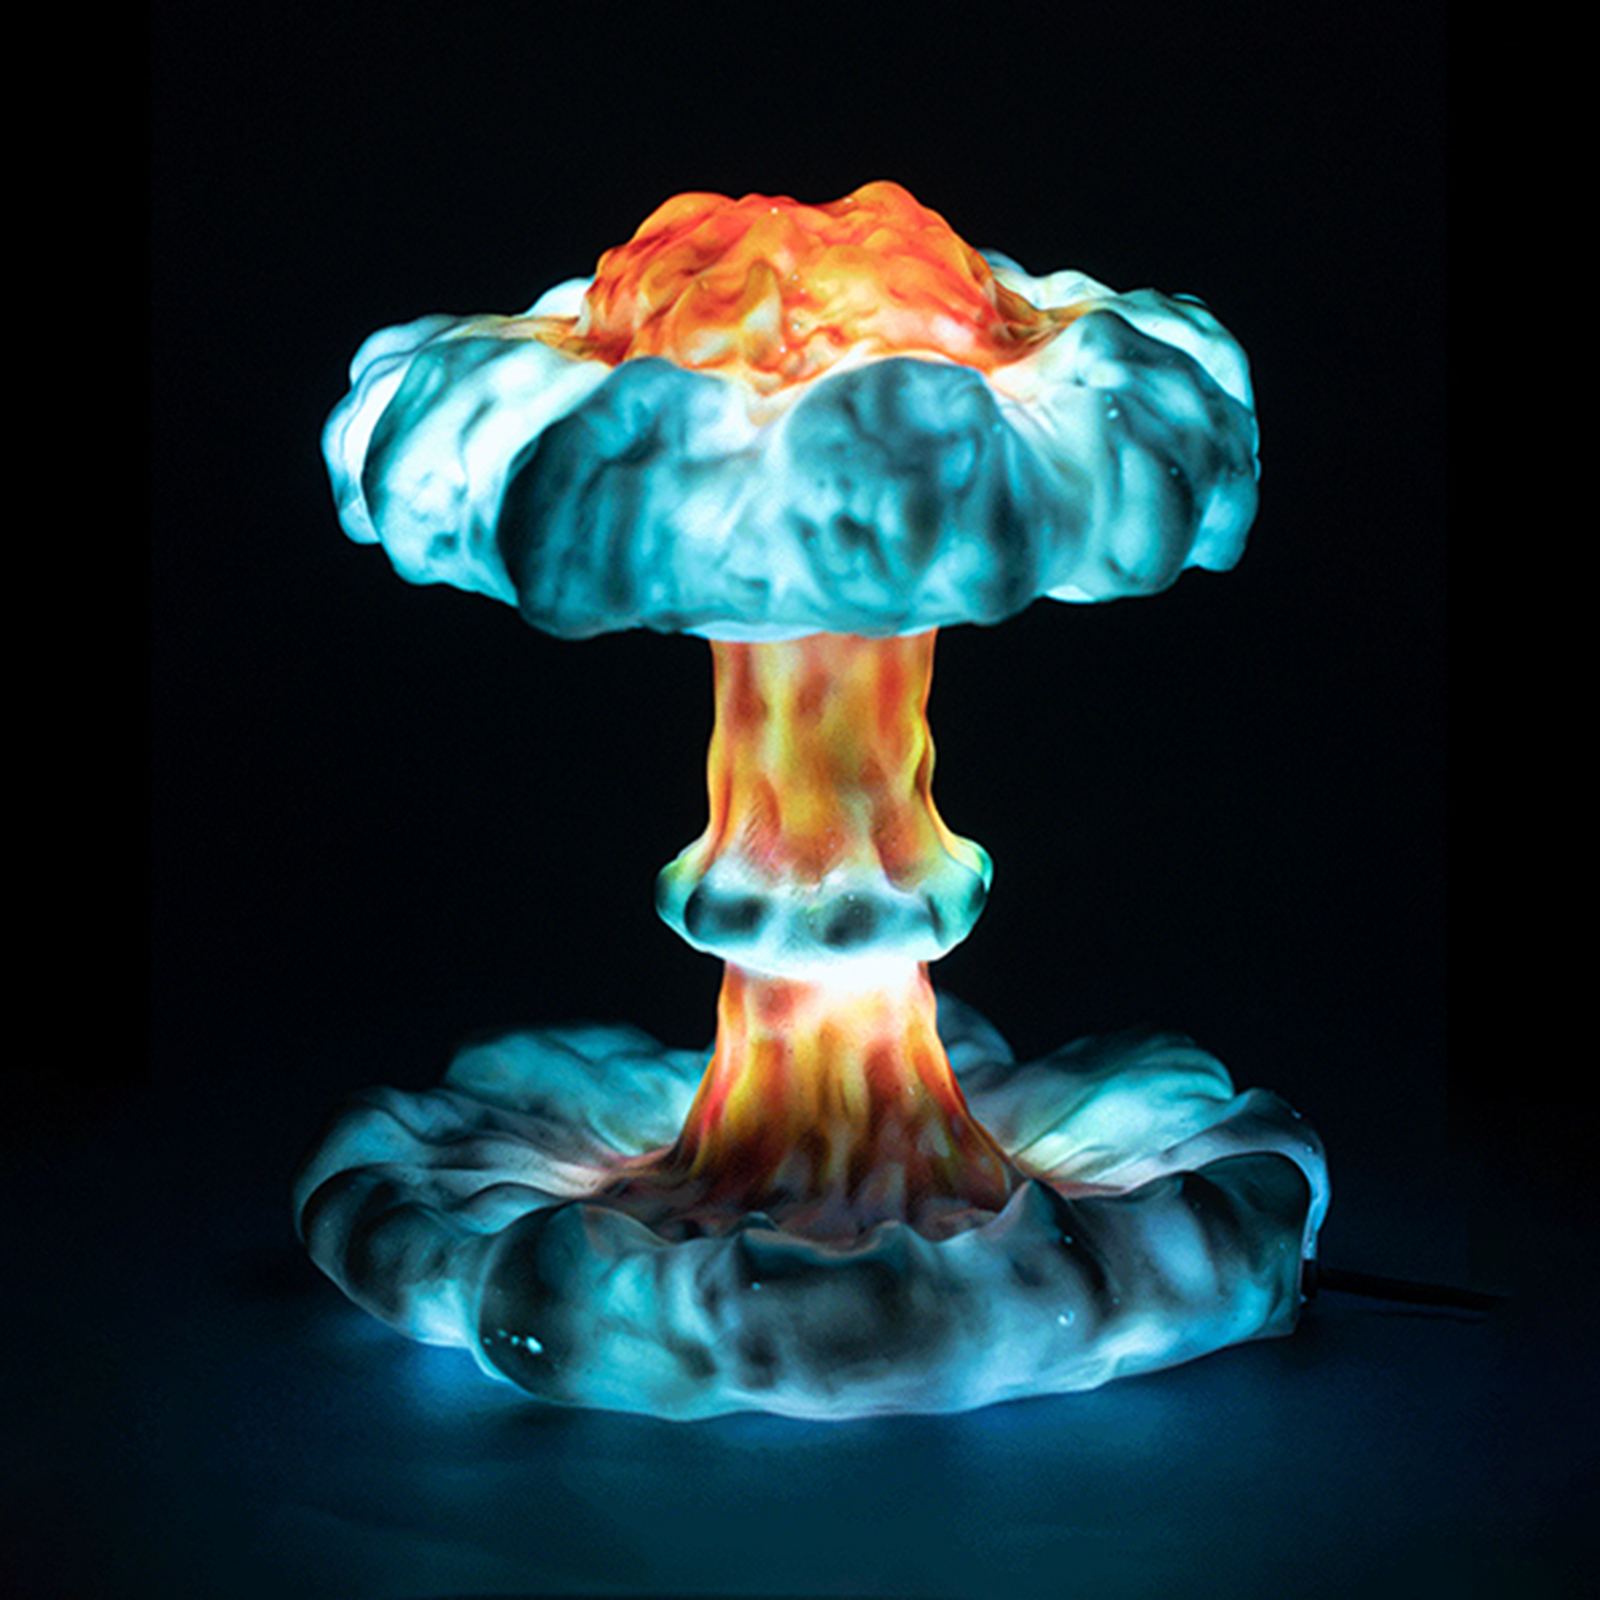 Nuclear Explosion Mushroom Cloud Night Light With Cotton Warm White Dimmable Lamp Kid's Gifts Home Deor USB Power Gifts